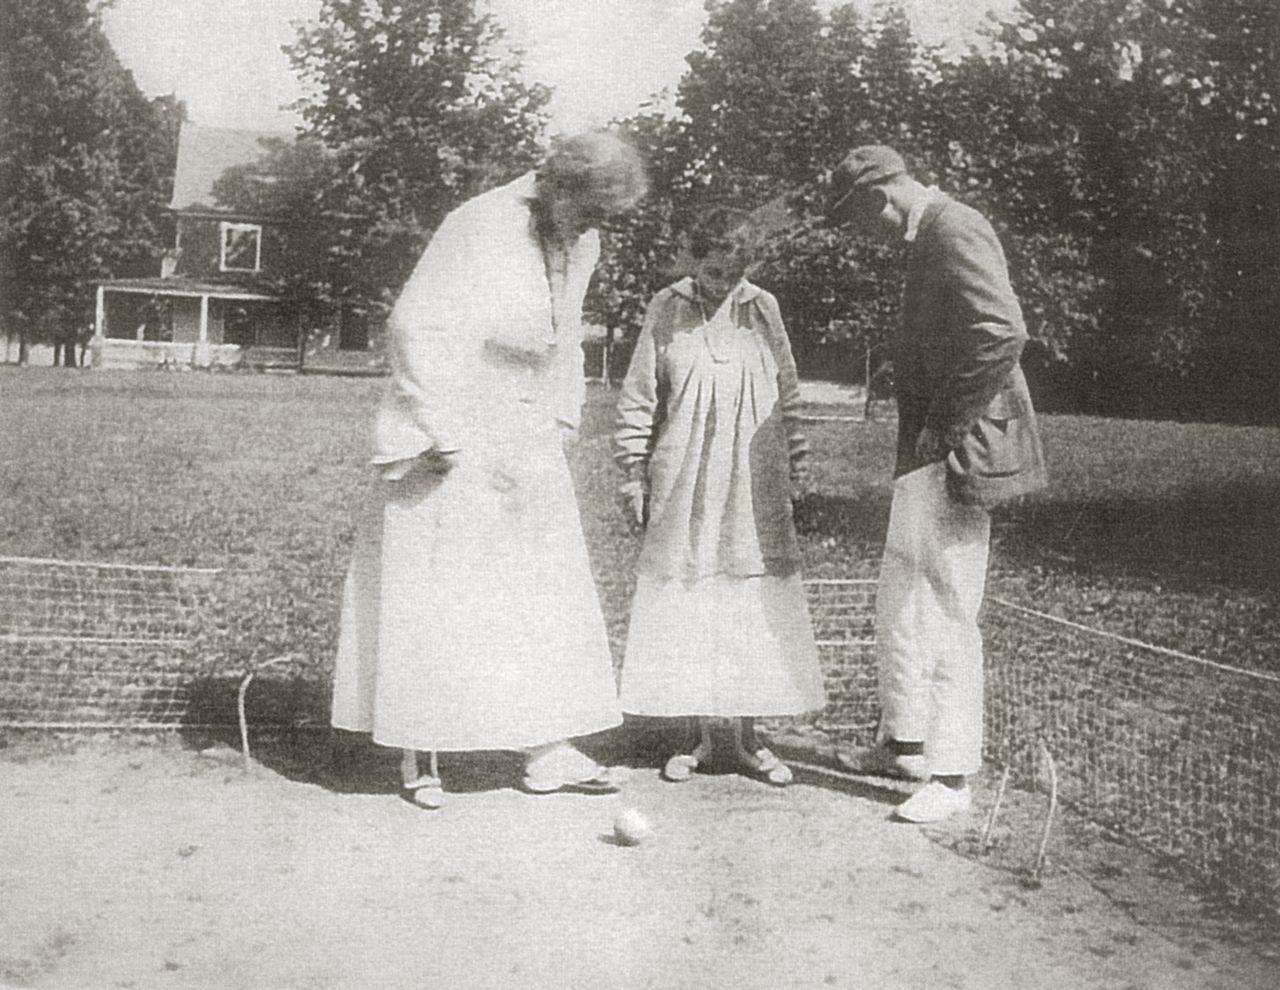 Middle Bass Club: Members playing croquet, circa 1915.